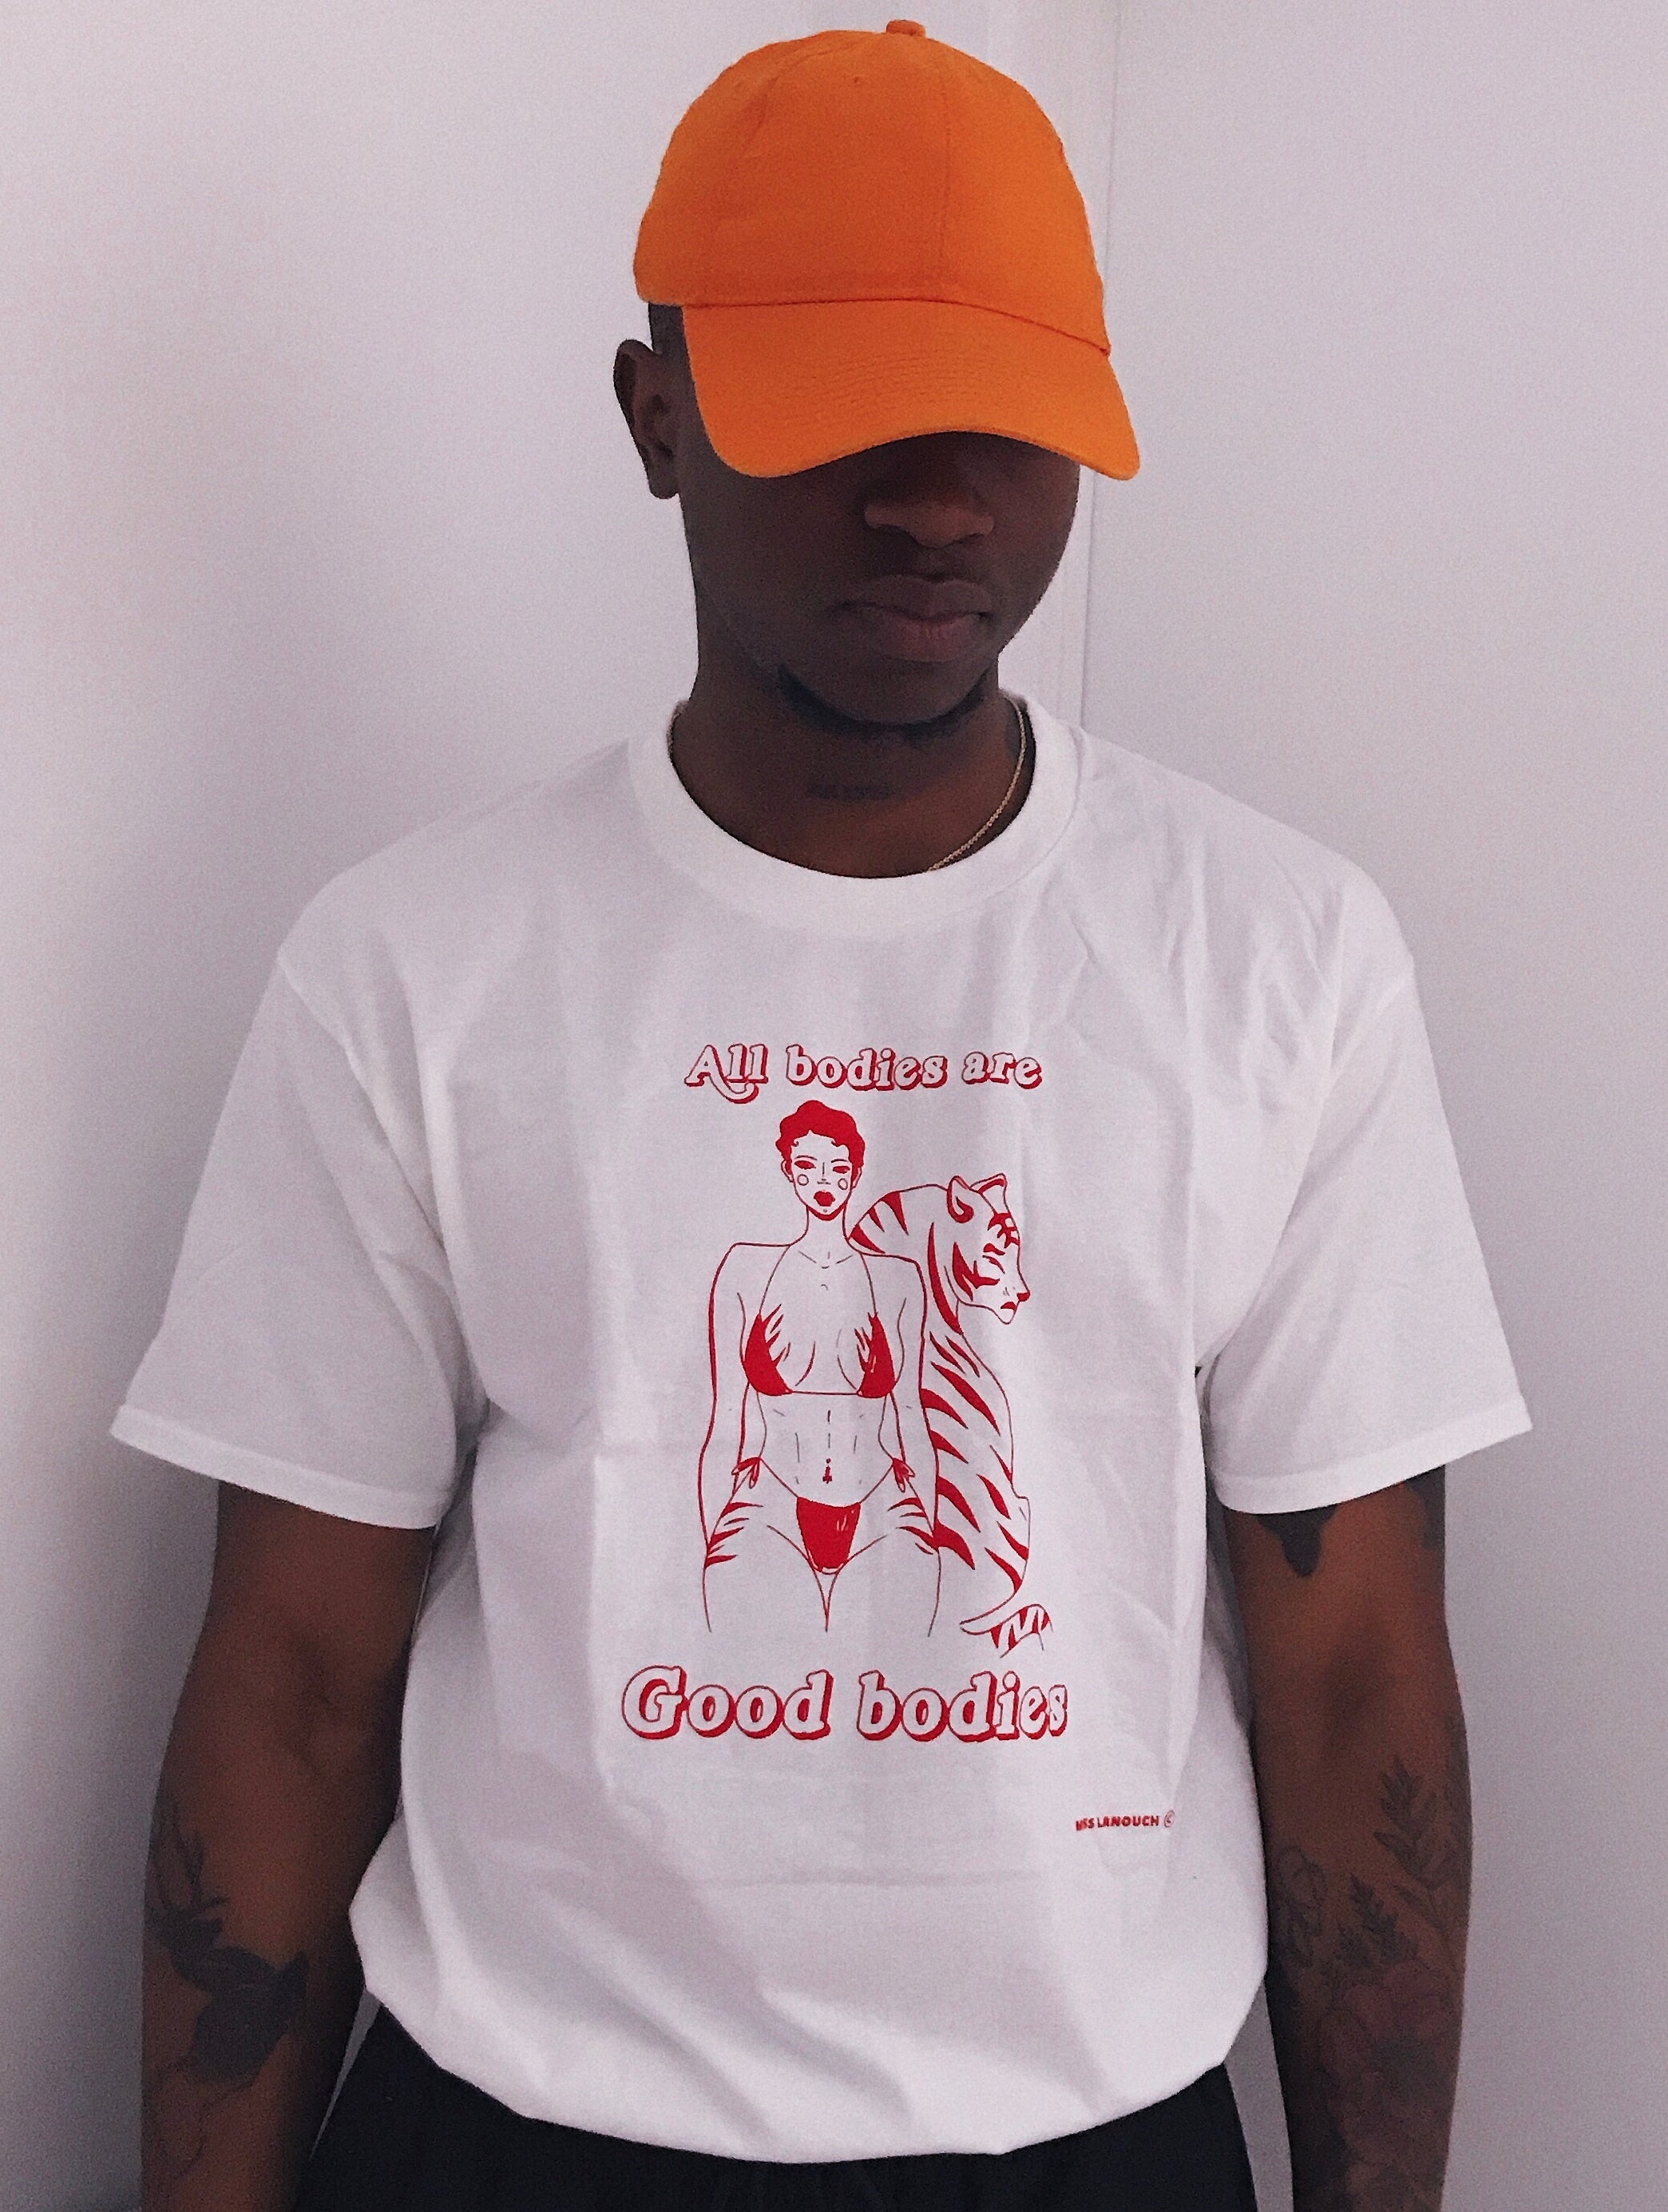 ALL BODIES ARE GOOD BODIES T-SHIRT